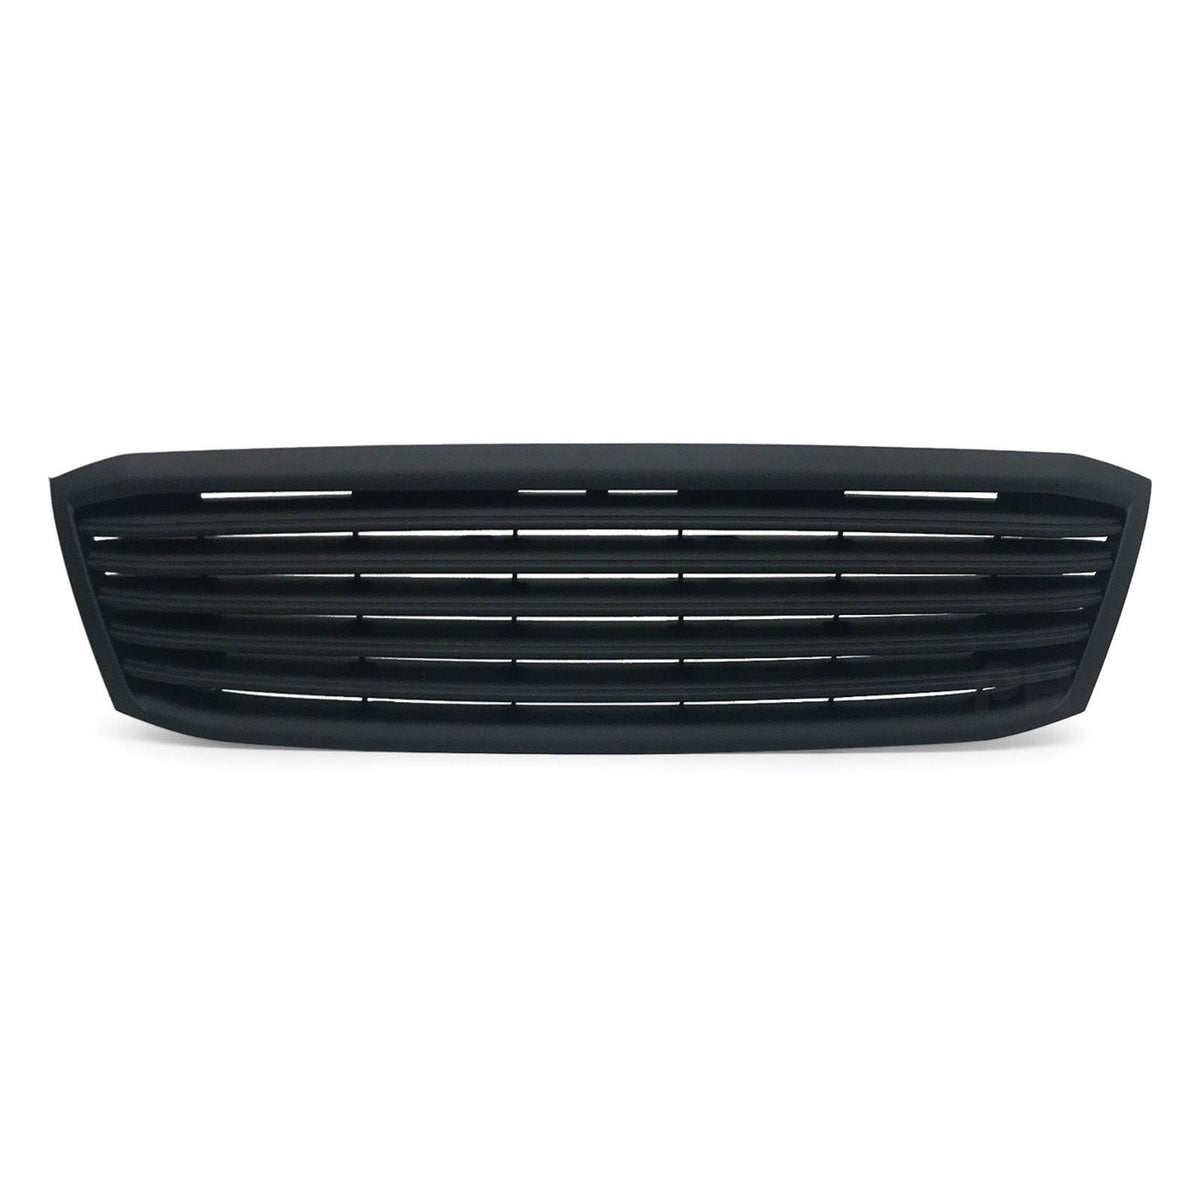 Grill Upgrade BLACK Billet Style fits Toyota Hilux Ute 2005 - 2008 - 4X4OC™